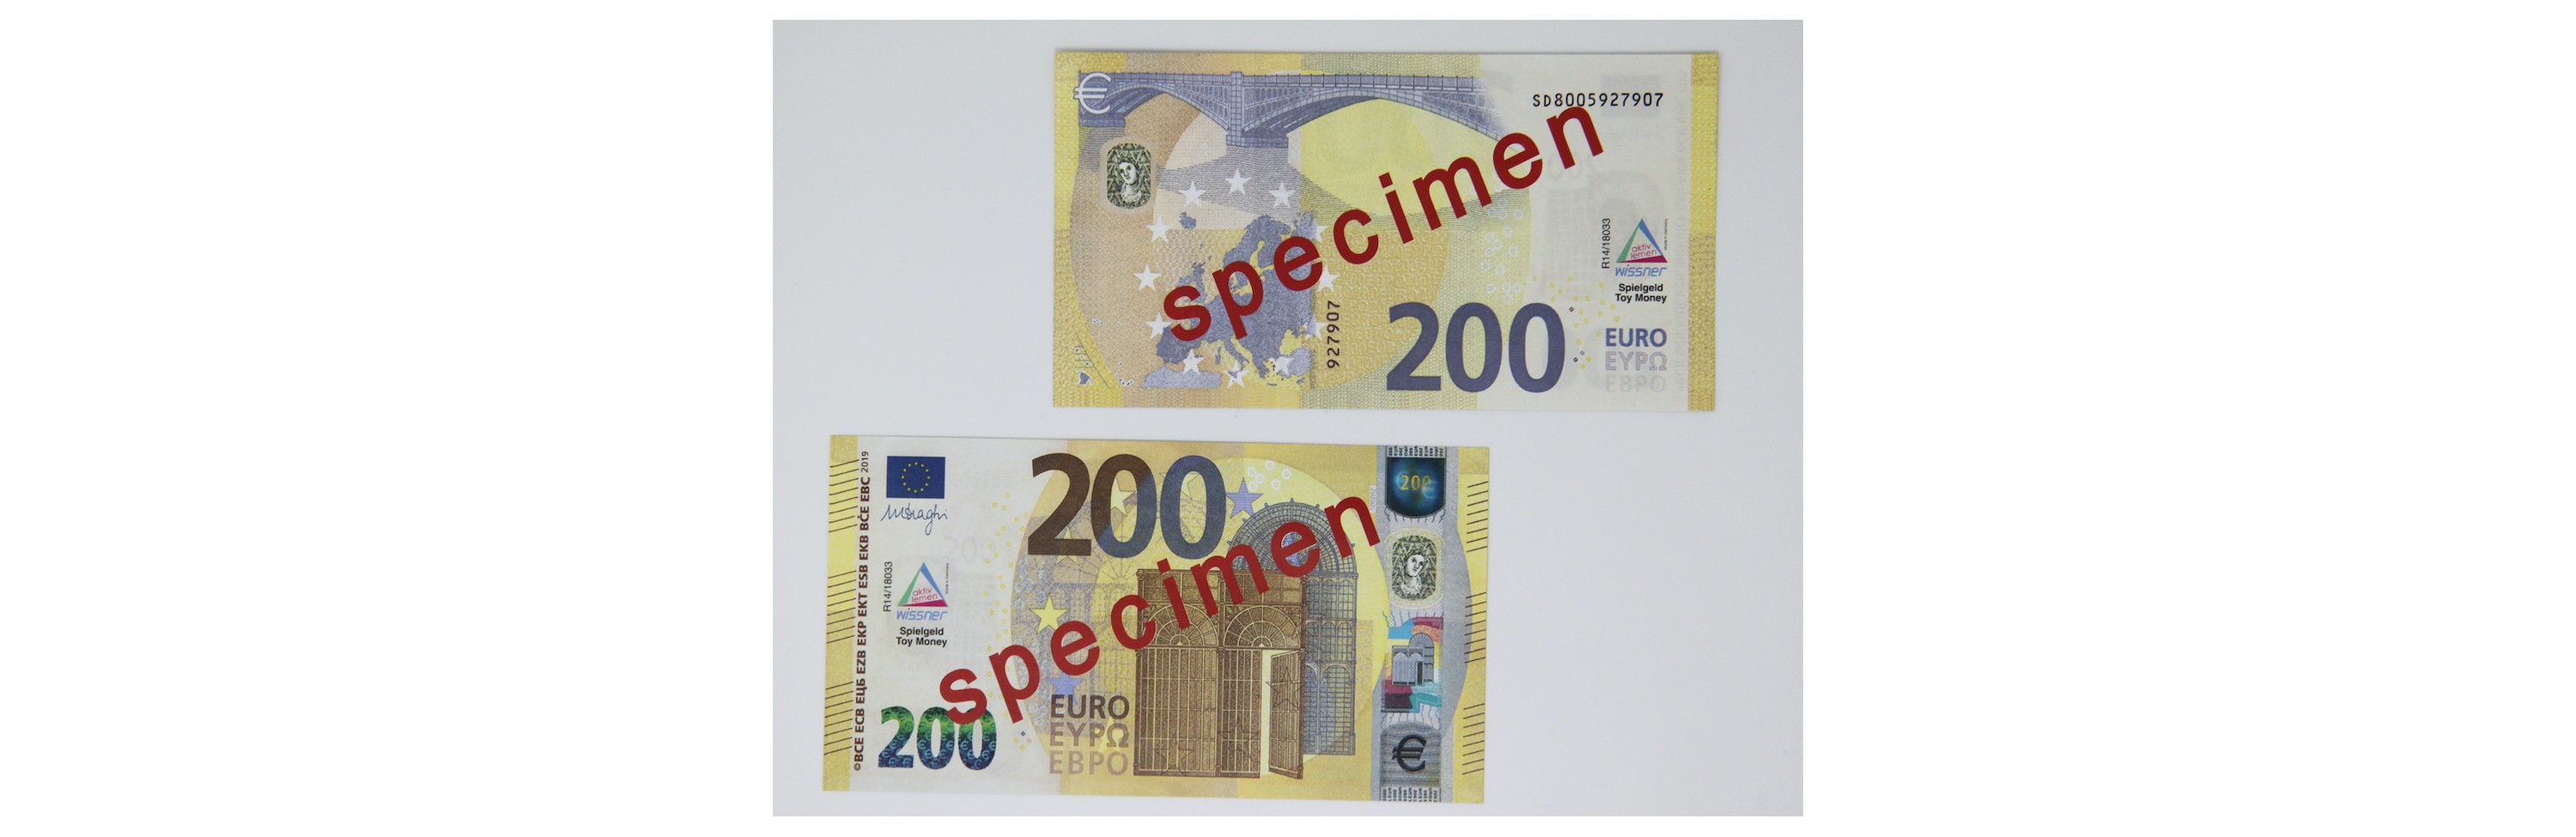 Wissner® active learning - 200 Euro - notes (100 pcs)